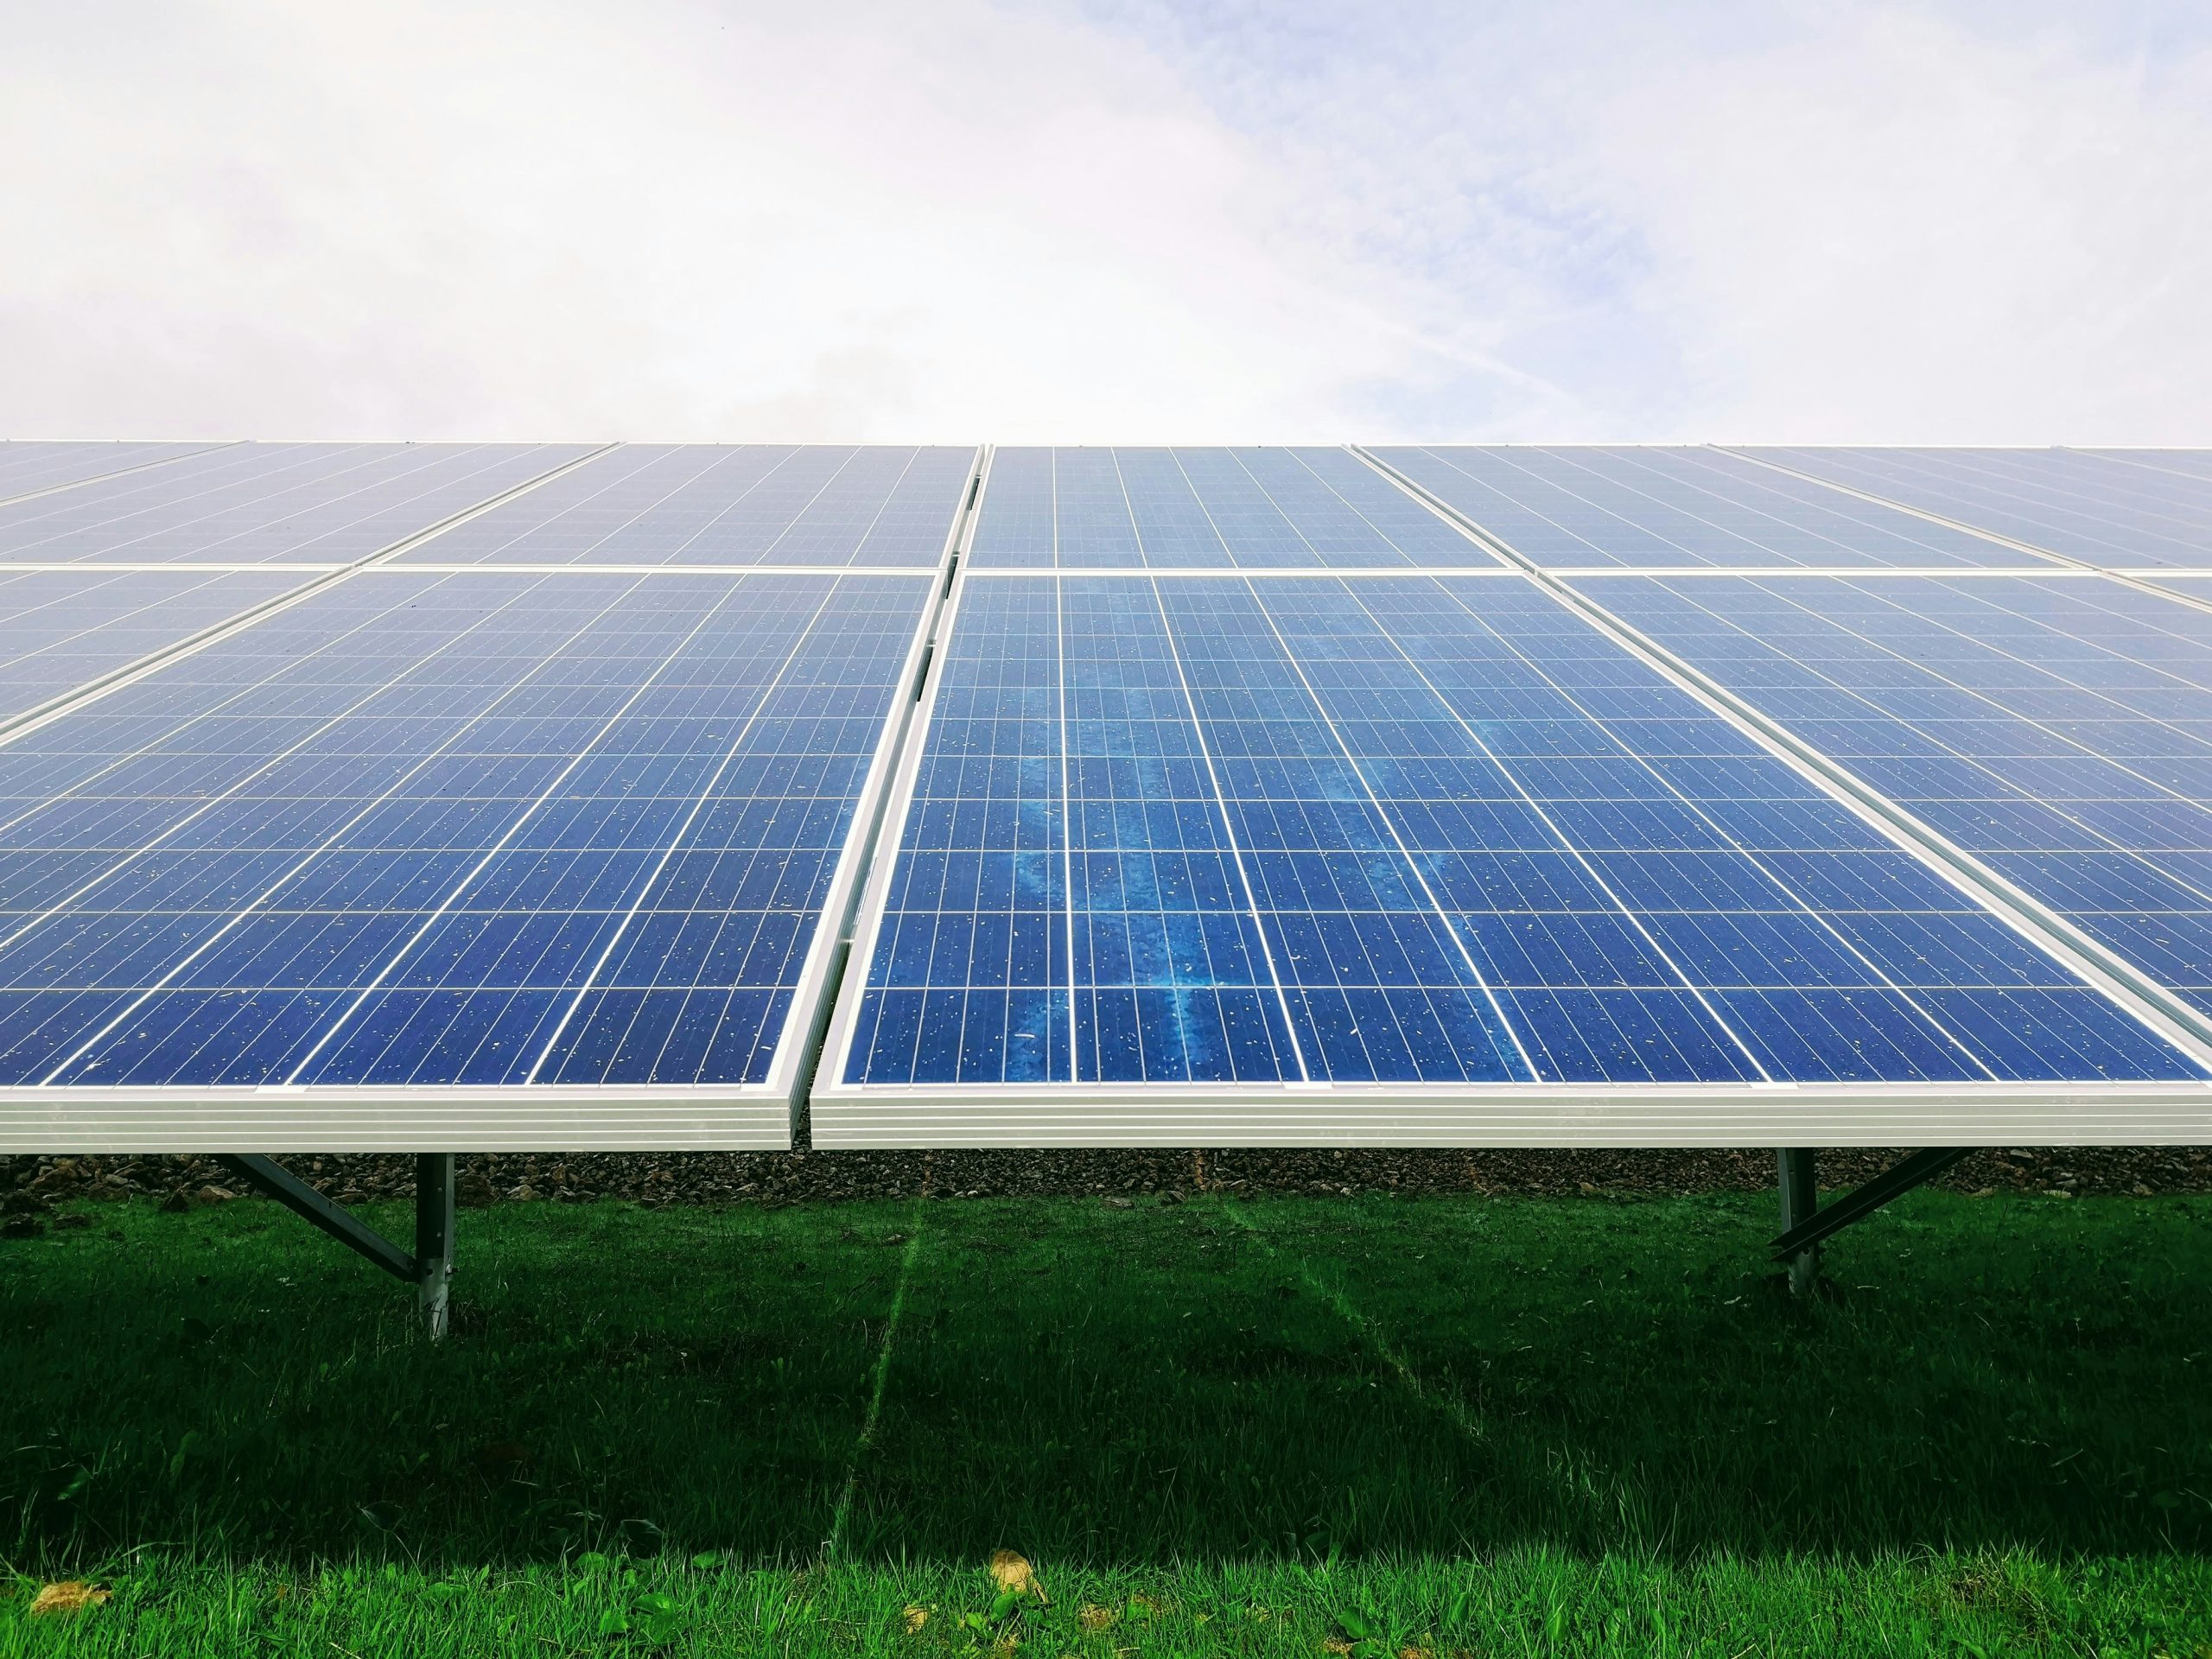 What Are The Pros And Cons Of Solar Panels?